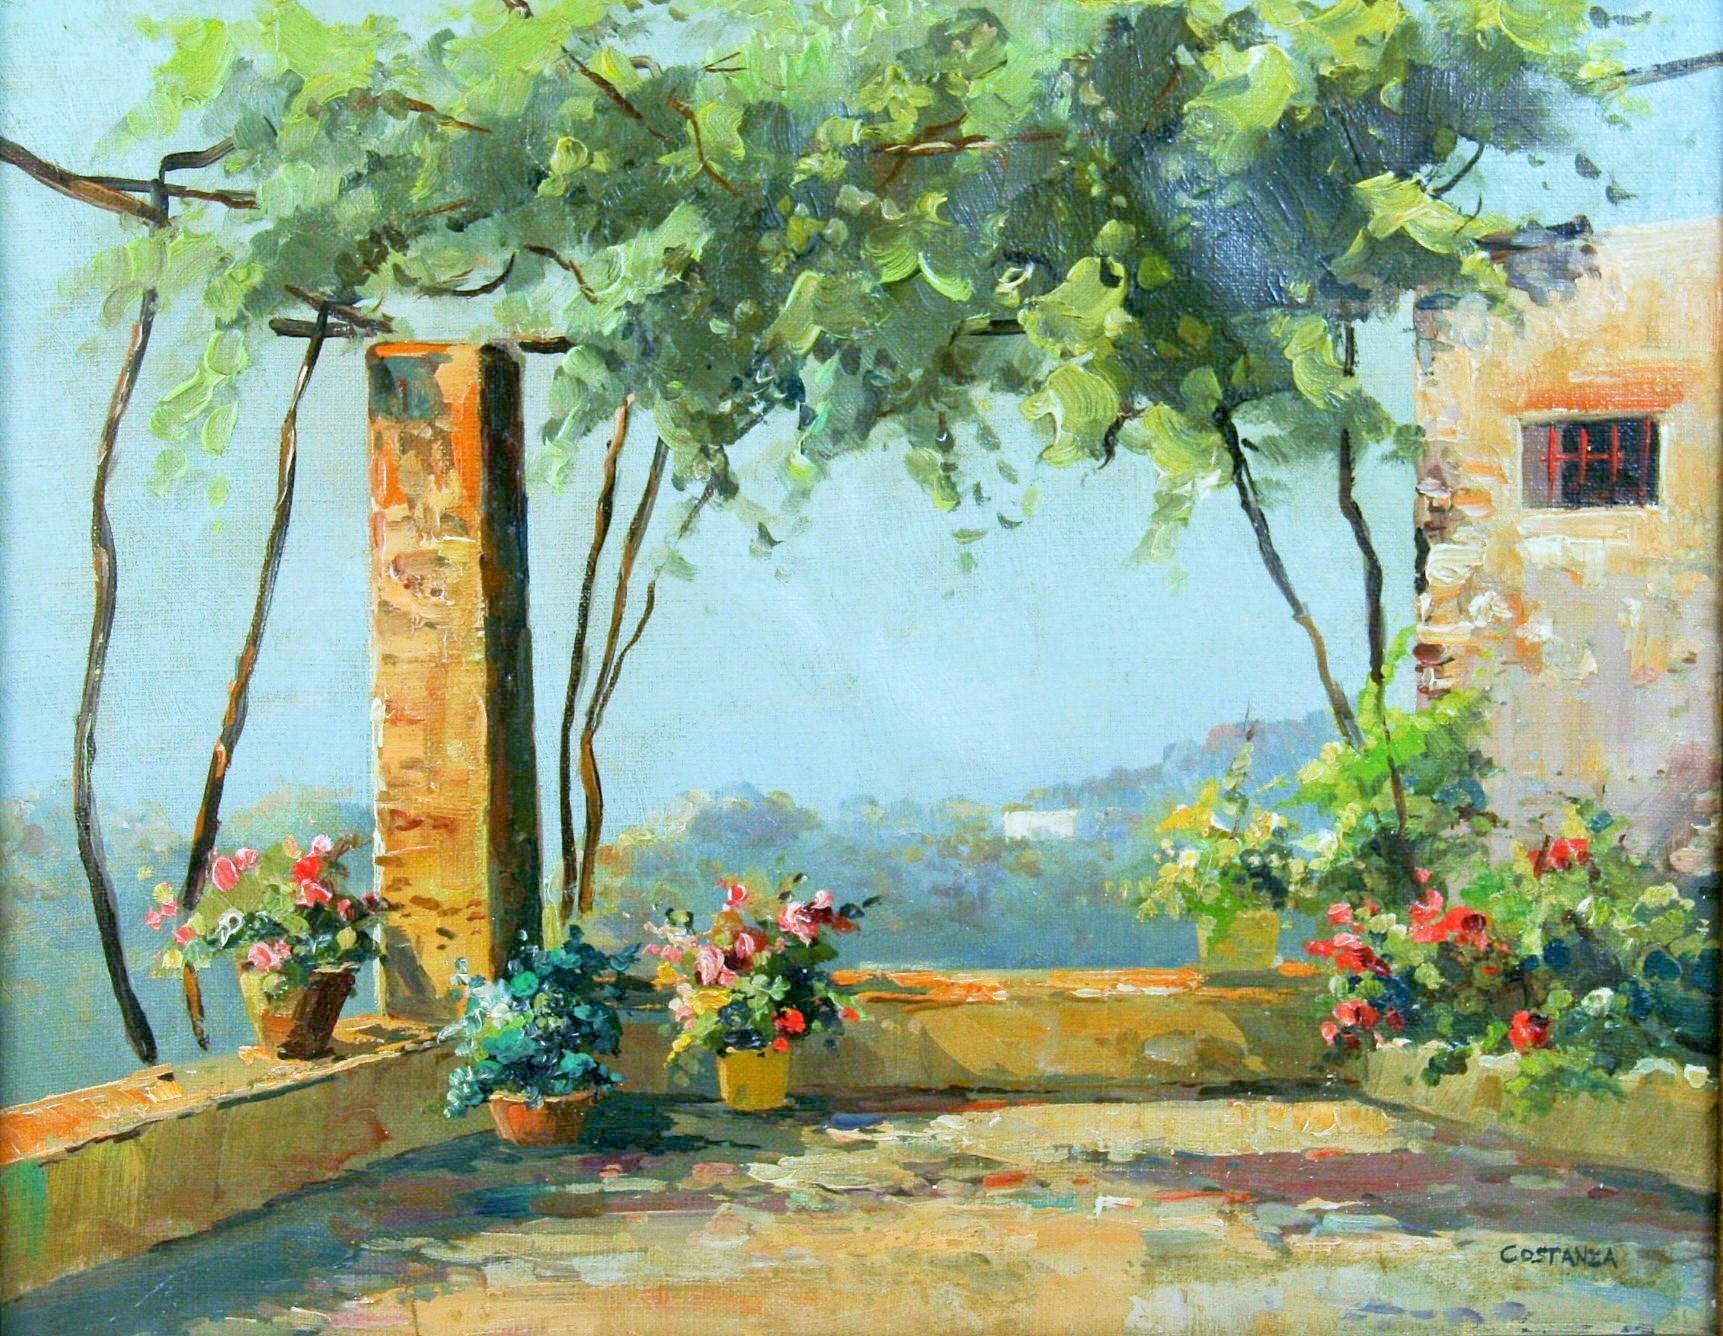 Antique Impressionist Capri Italy Terrace Landscape 1940's - Painting by Costanza